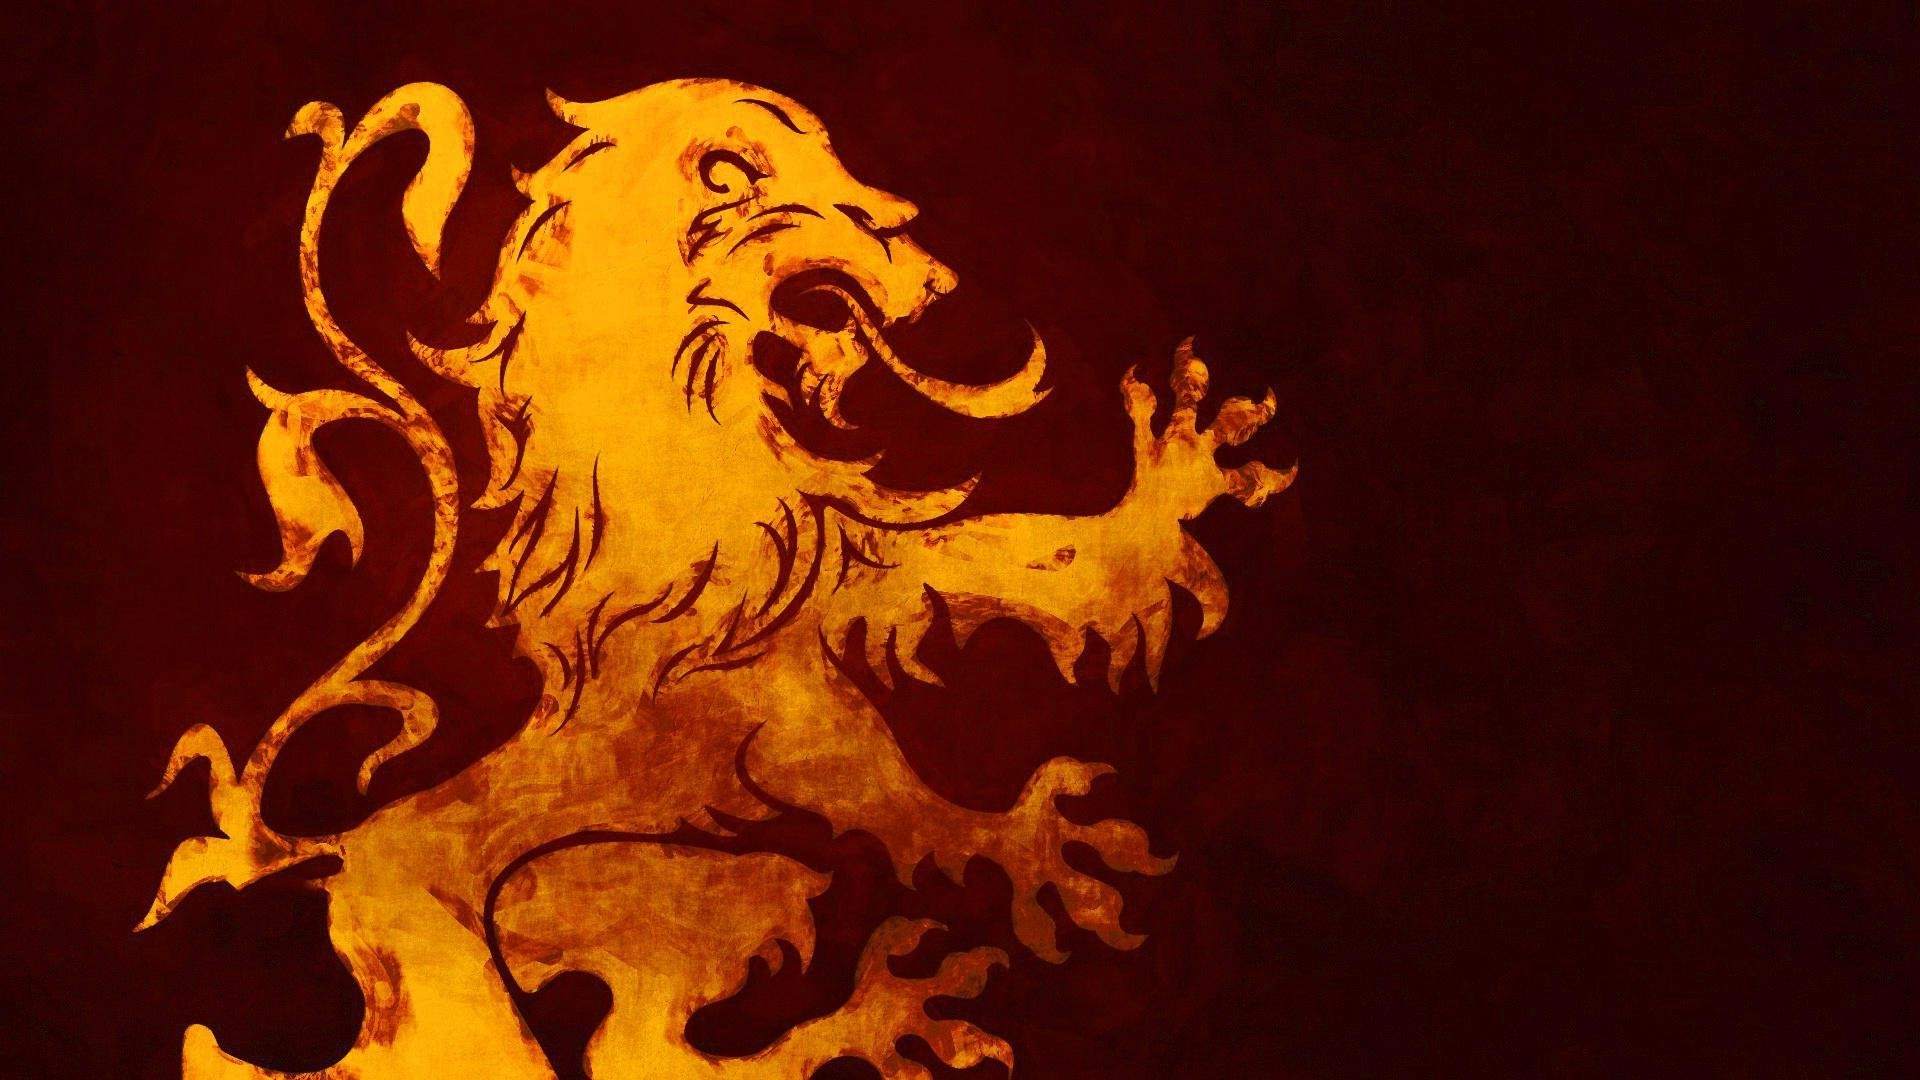 1920x1080 Wallpaper : lion, A Song of Ice and Fire, Game of Thrones, House Lannister, sigils, flame, px 4kWallpaper 564012 HD Wallpapers